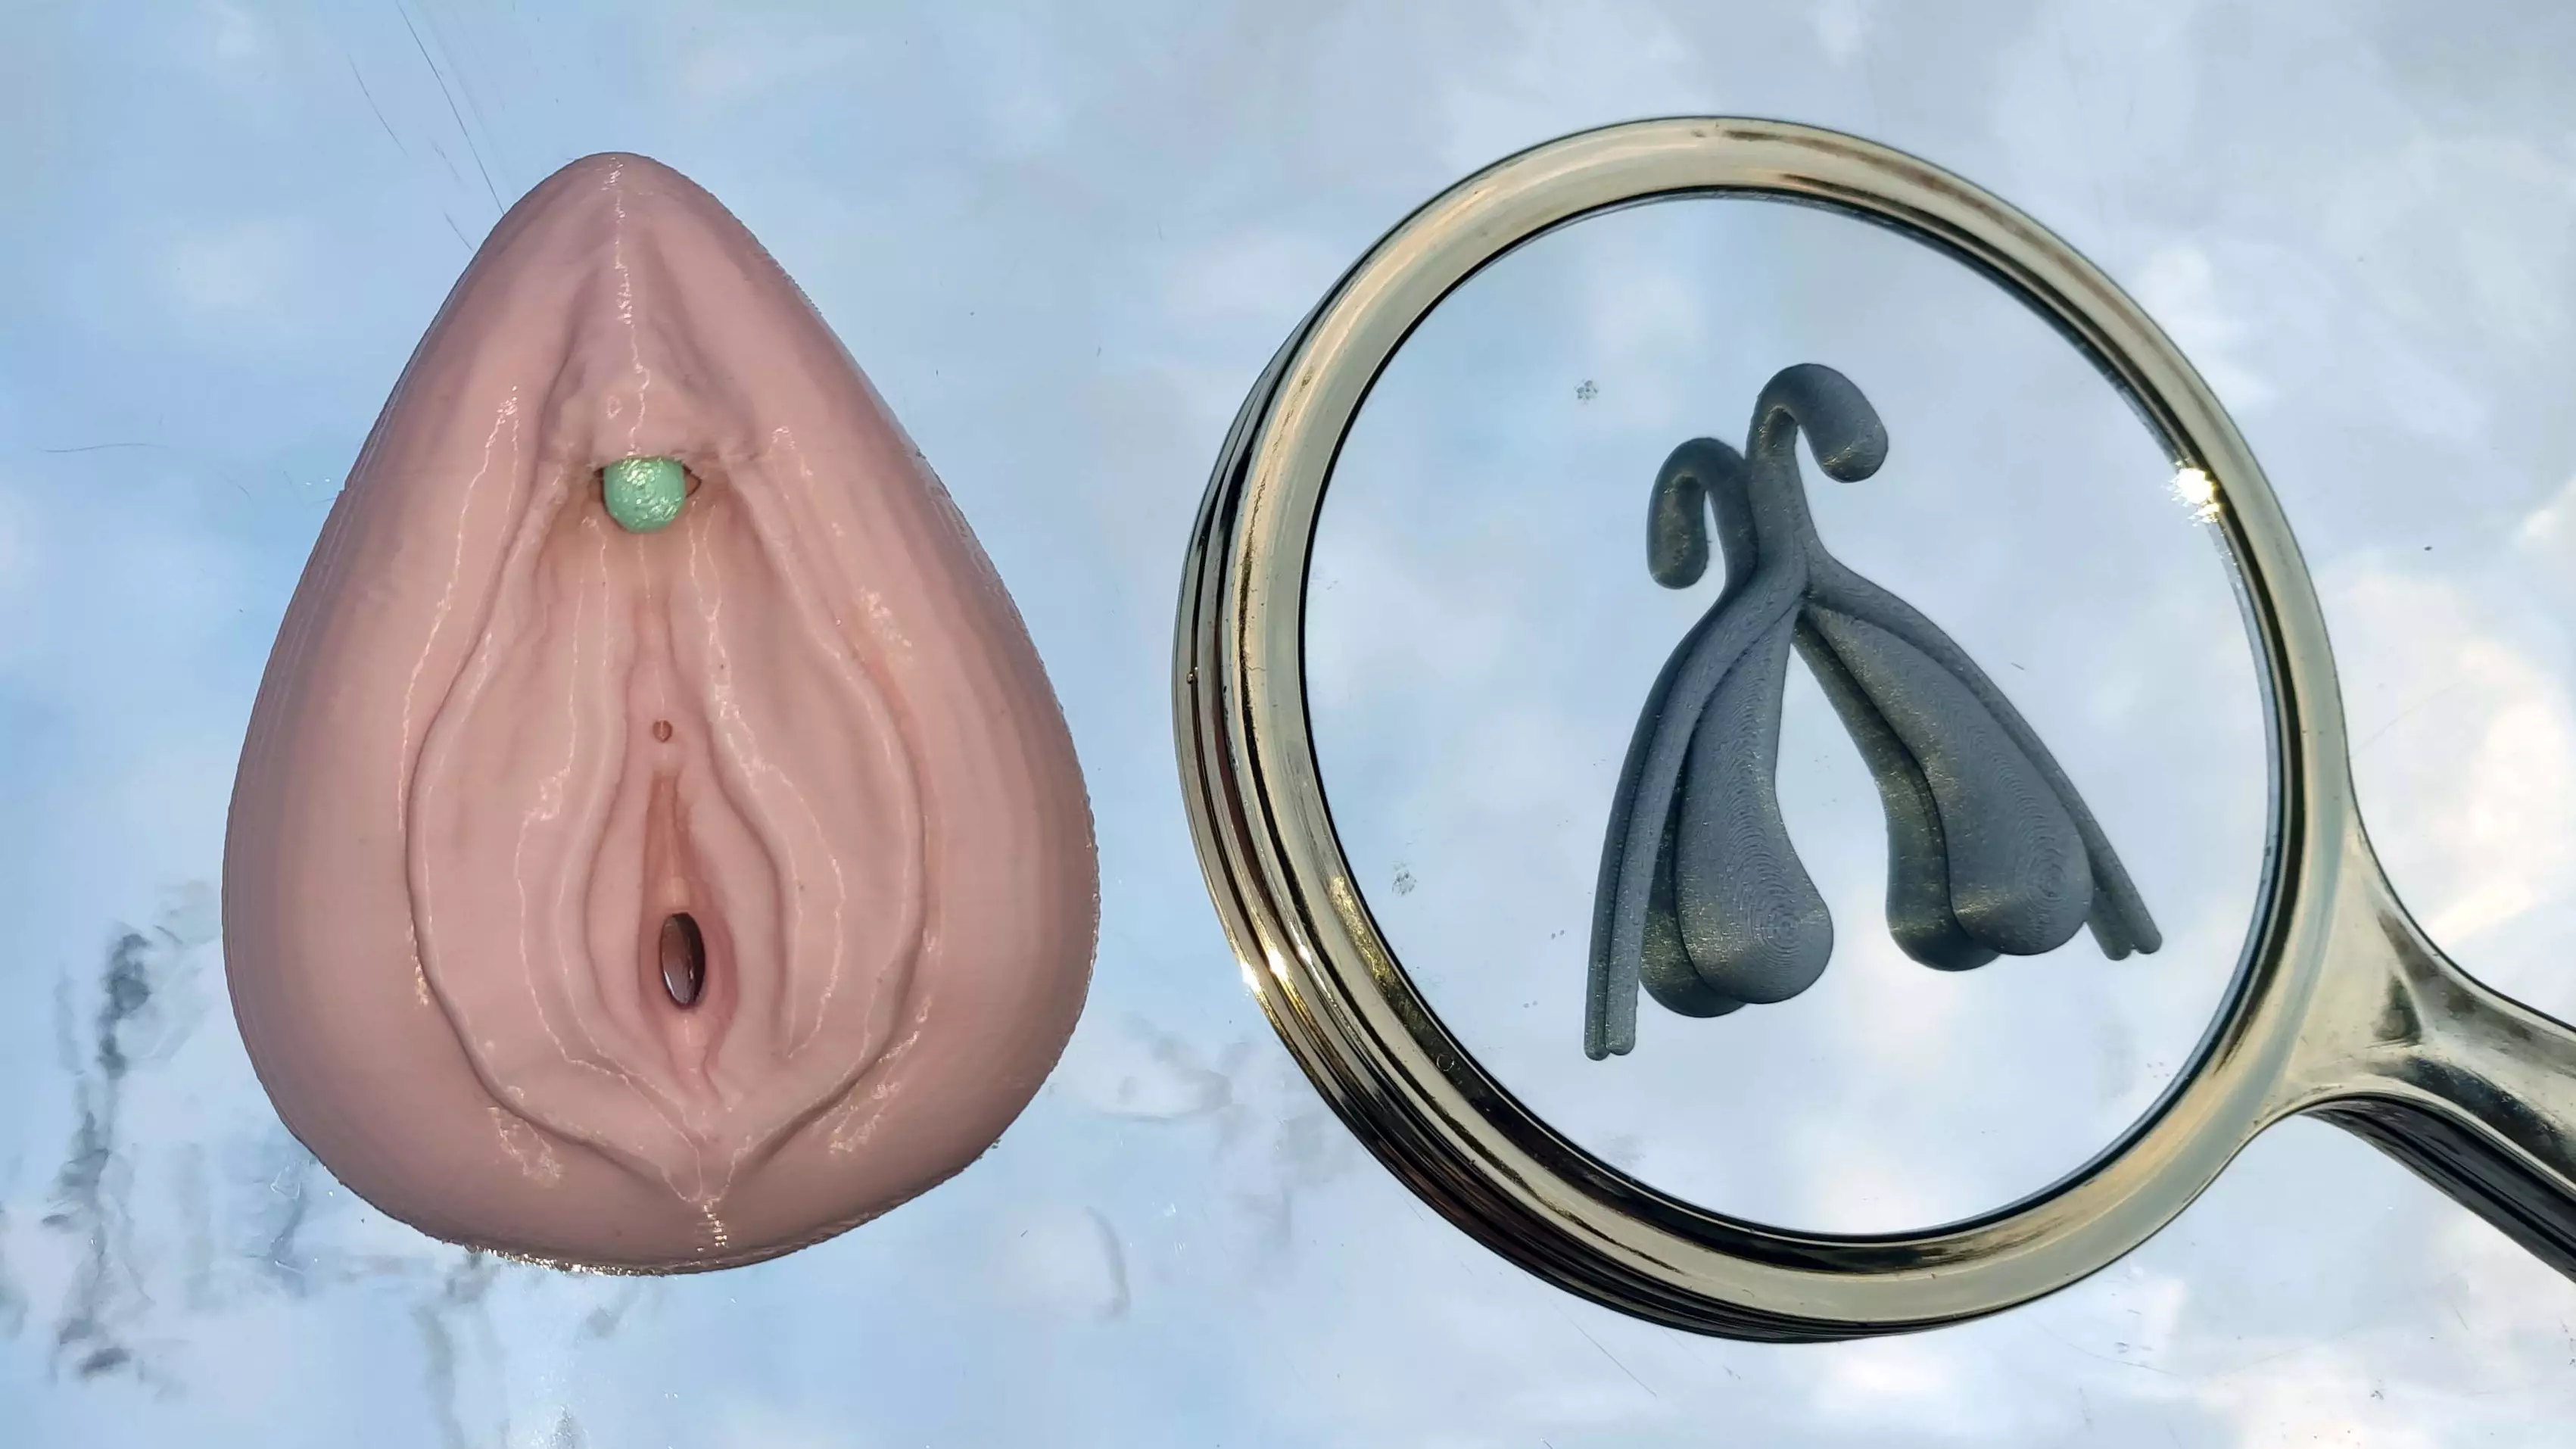 Artist Creates 3D Clitoris Models To Help Educate 31% Of Men Who Can’t Find It